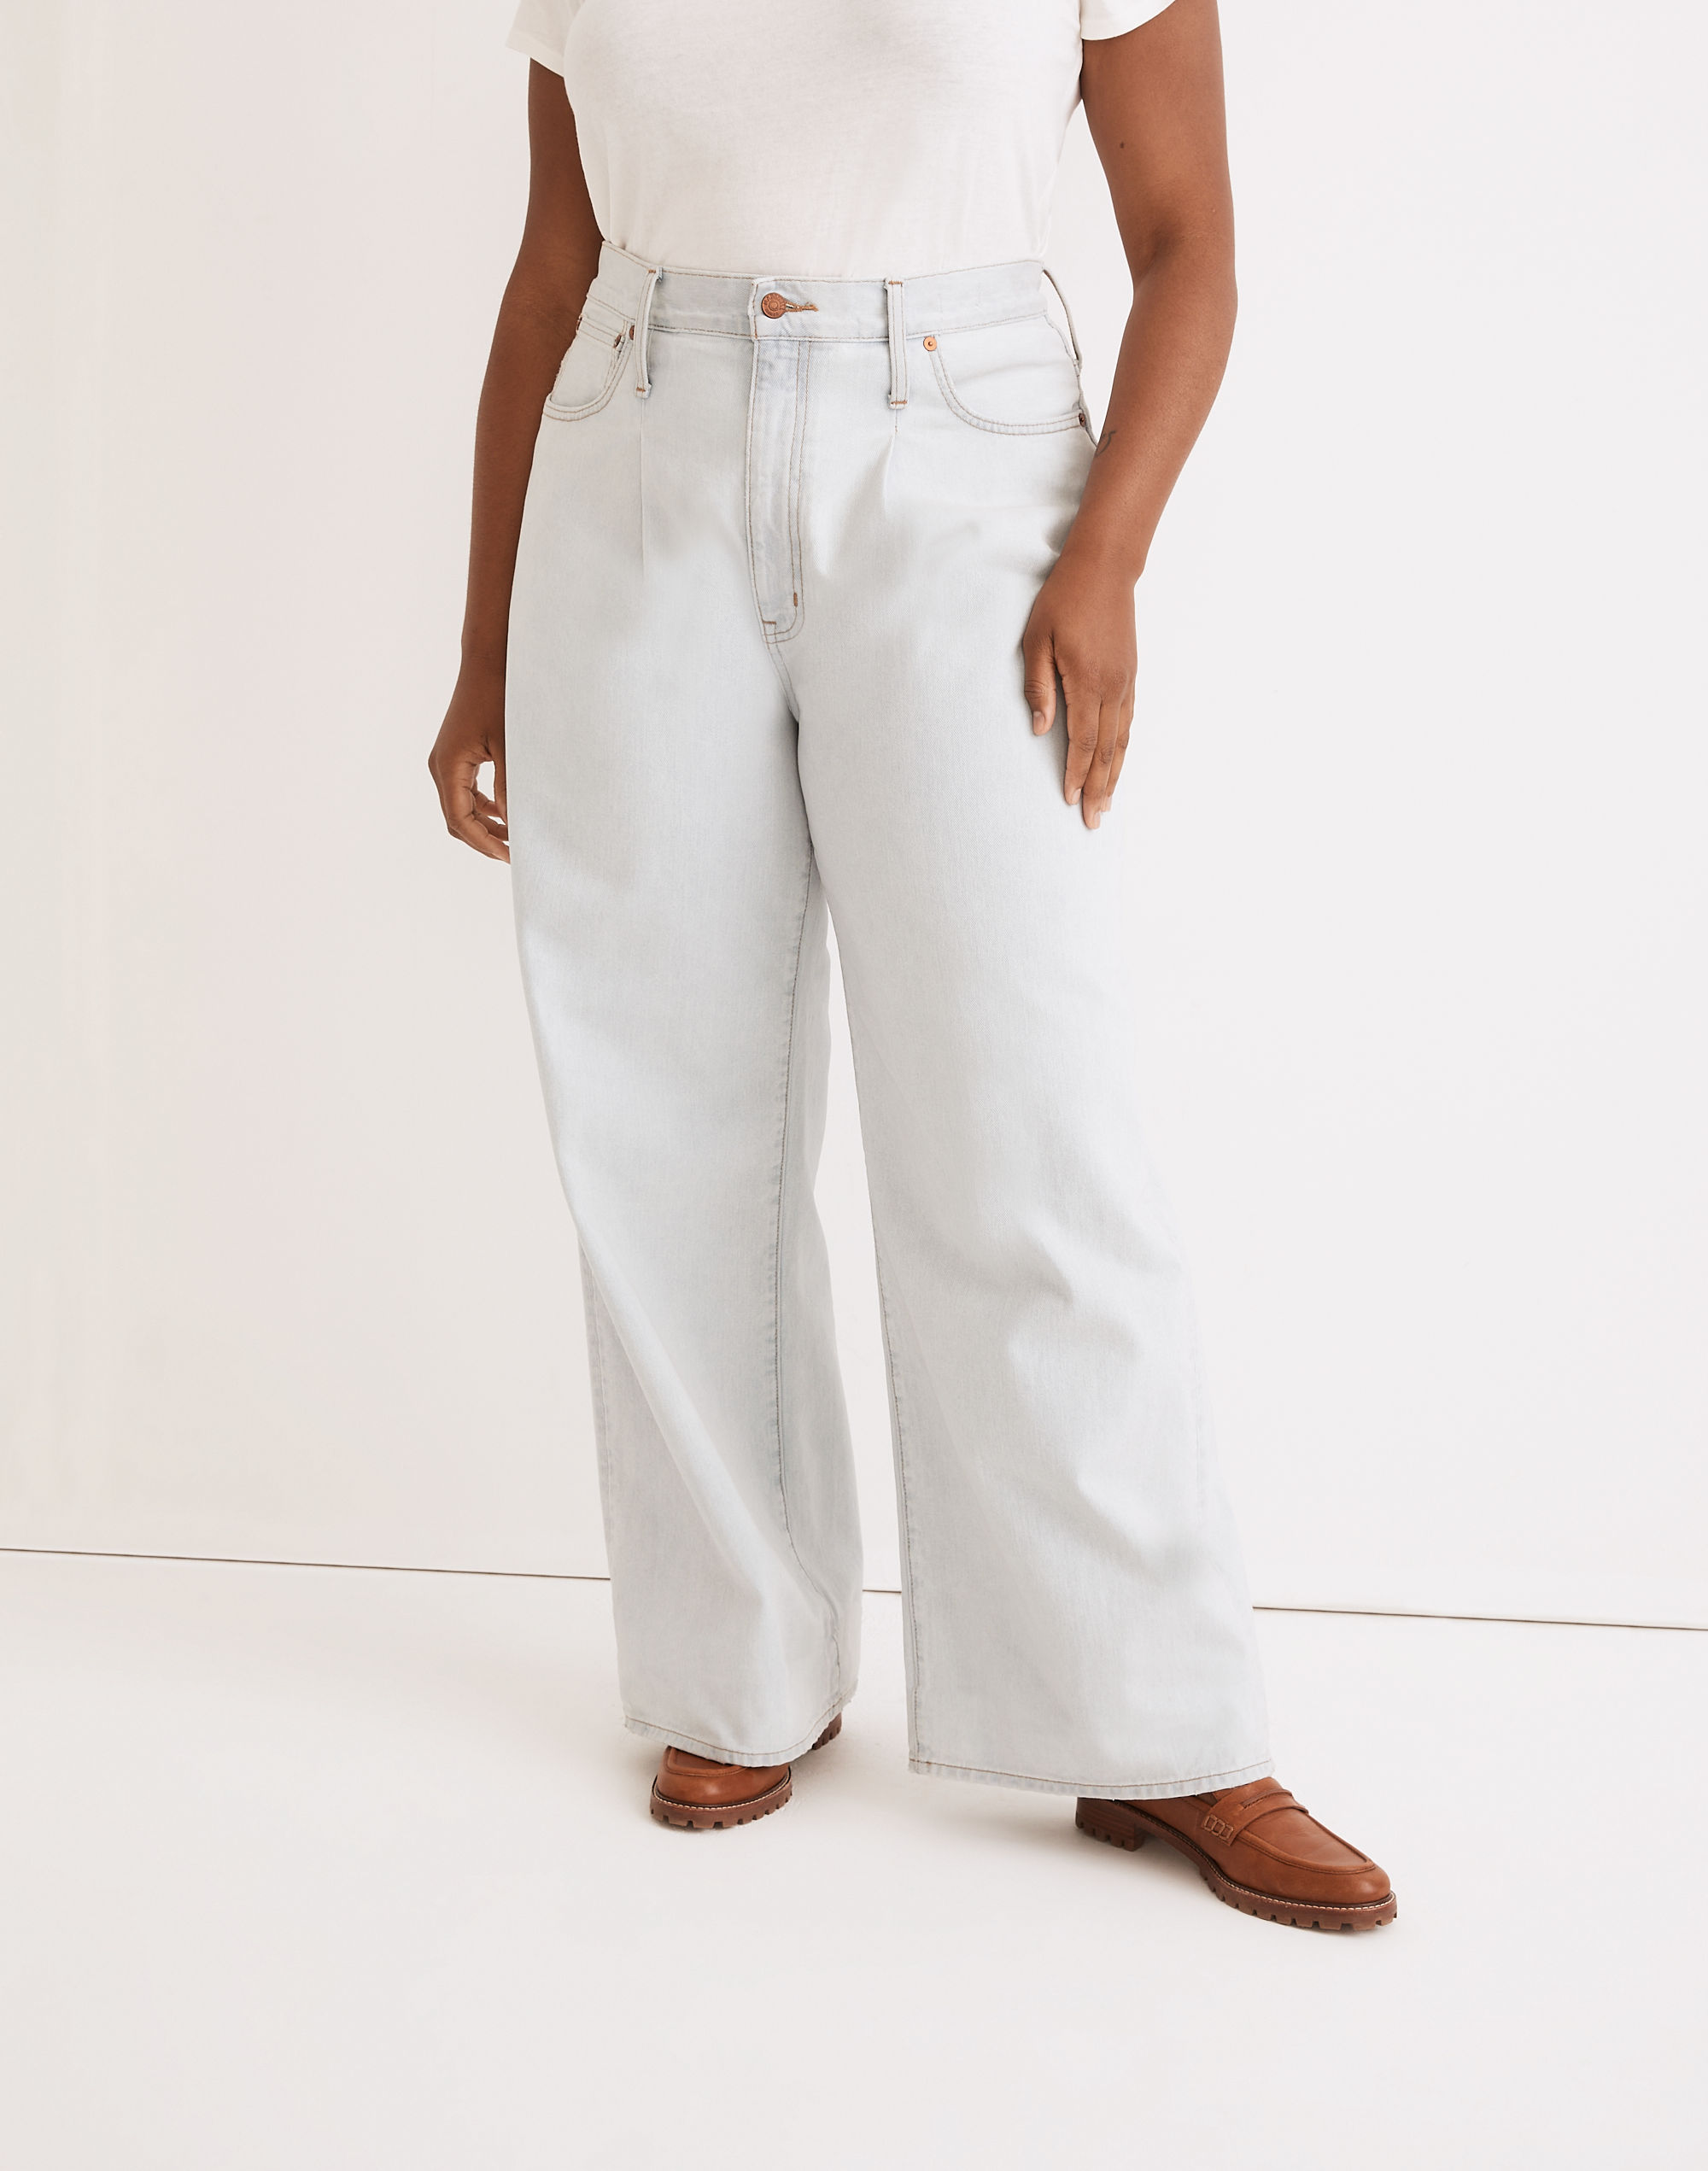 Superwide-Leg Jeans Olcott Wash: Pleated Edition